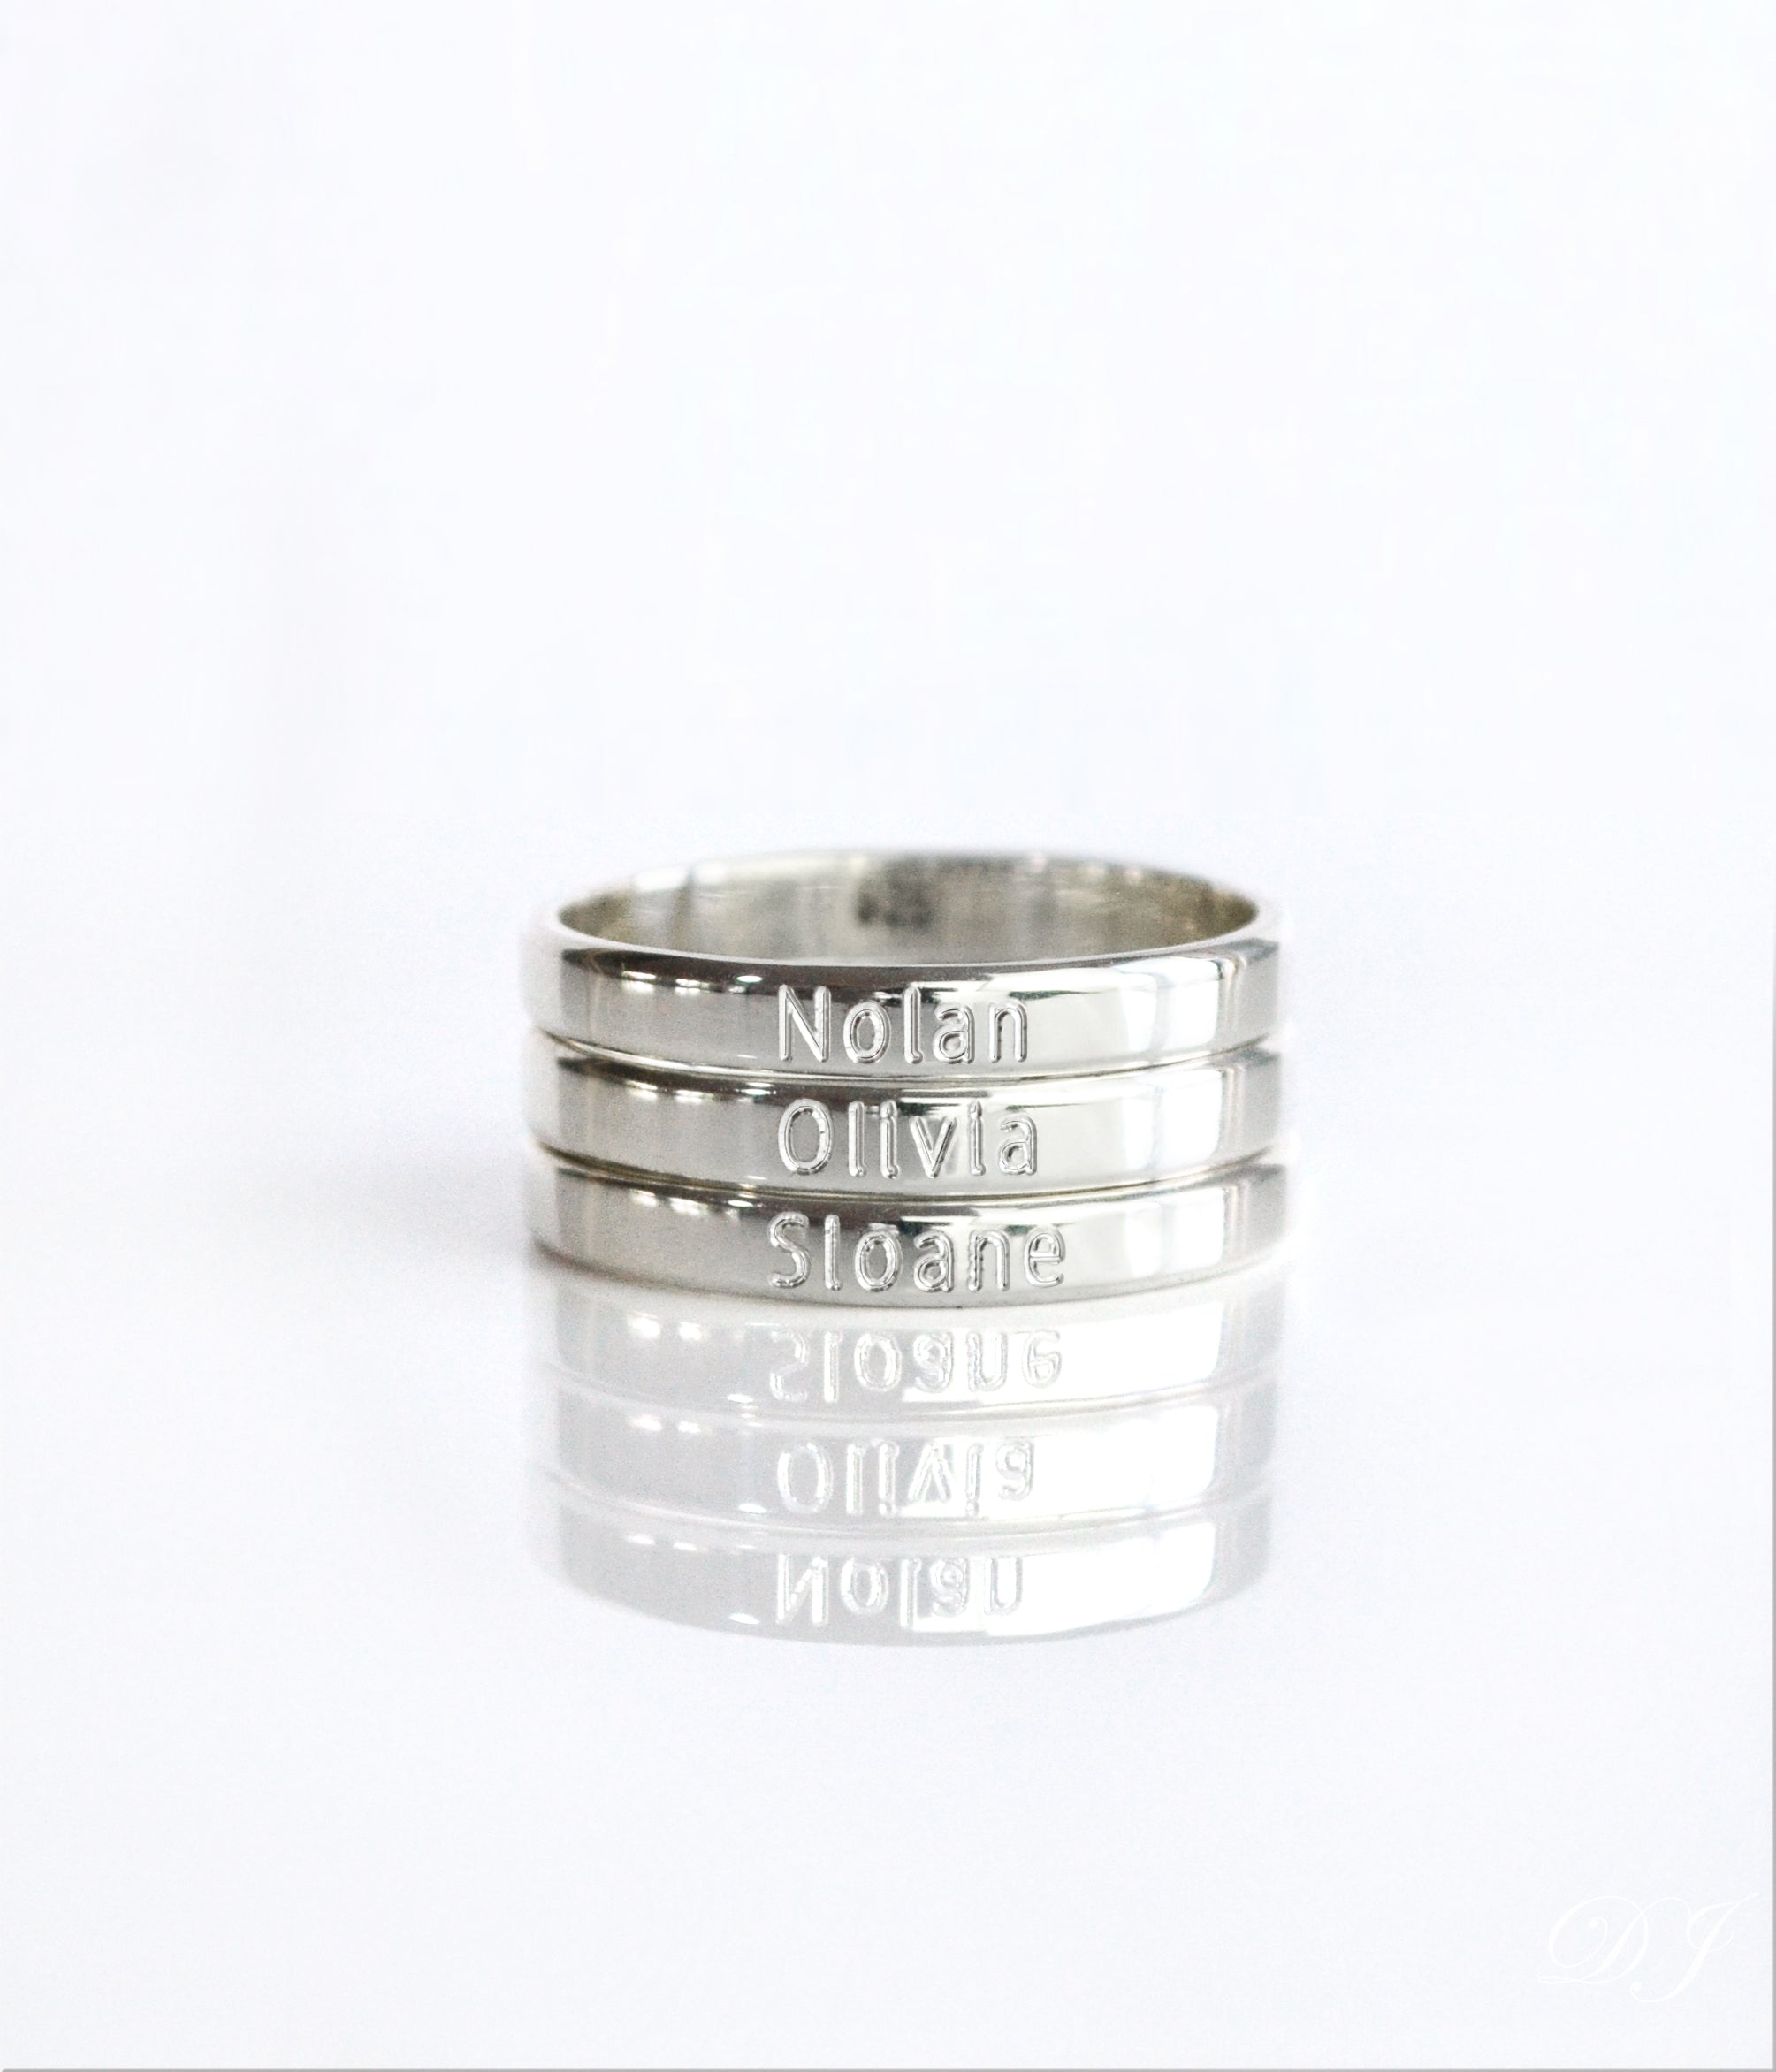 Amazon.com: Personalized Sterling Silver Stacking Ring, Custom Name  Personalized, or Mother's Ring Stackable, Name Rings, Mothers Day Gift, 2  Kids Names on Rings- 3 Ring Set : Handmade Products